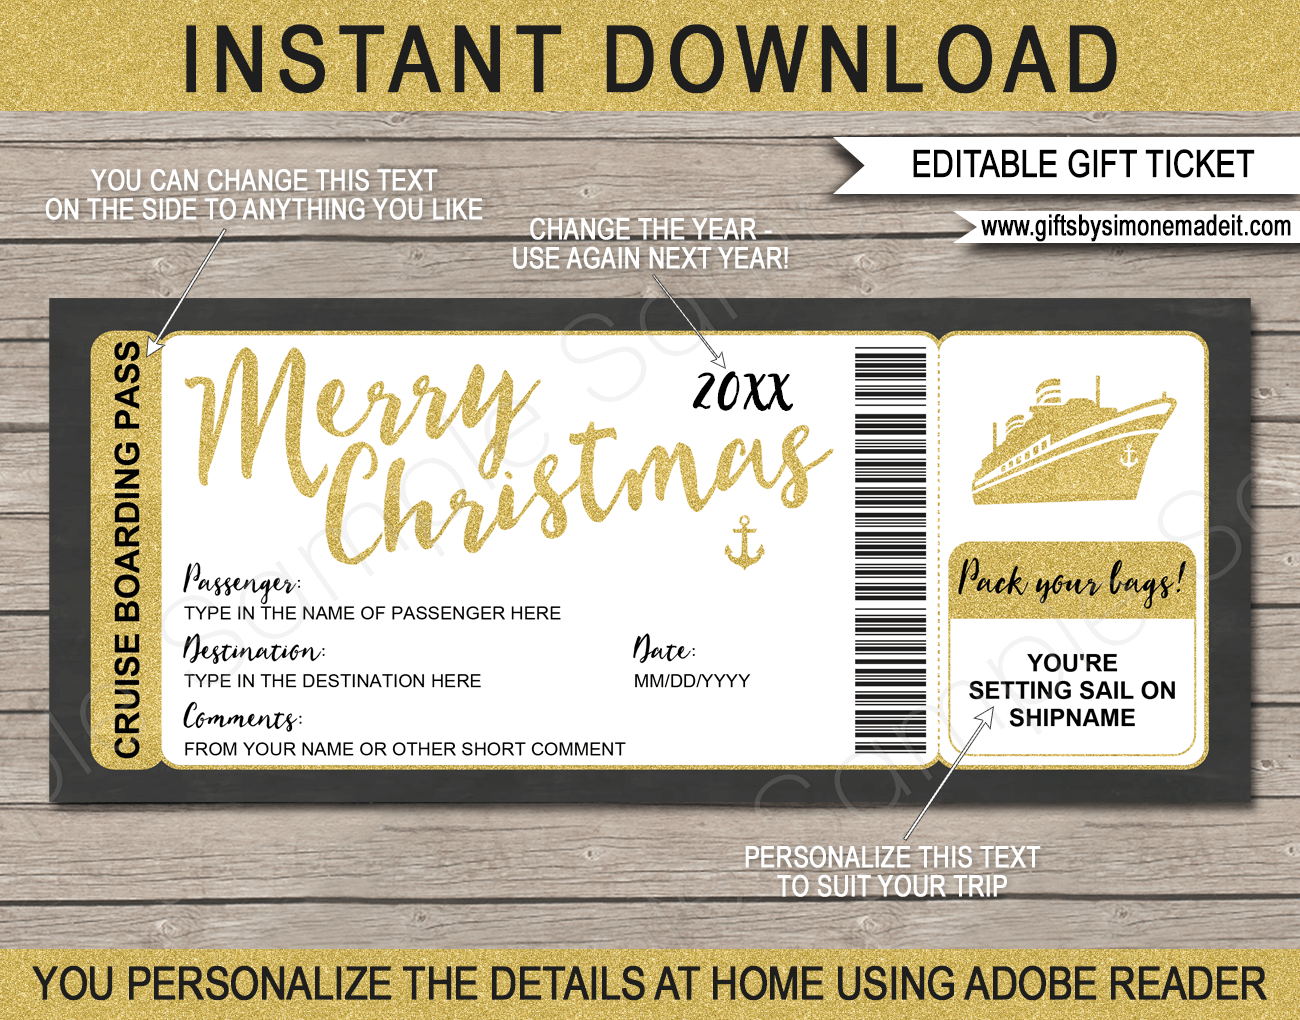 Printable Gold Christmas Cruise Boarding Pass Template | DIY Editable Cruise Ticket Gift Template | Xmas Surprise Cruise Reveal | INSTANT DOWNLOAD via giftsbysimonemadeit.com